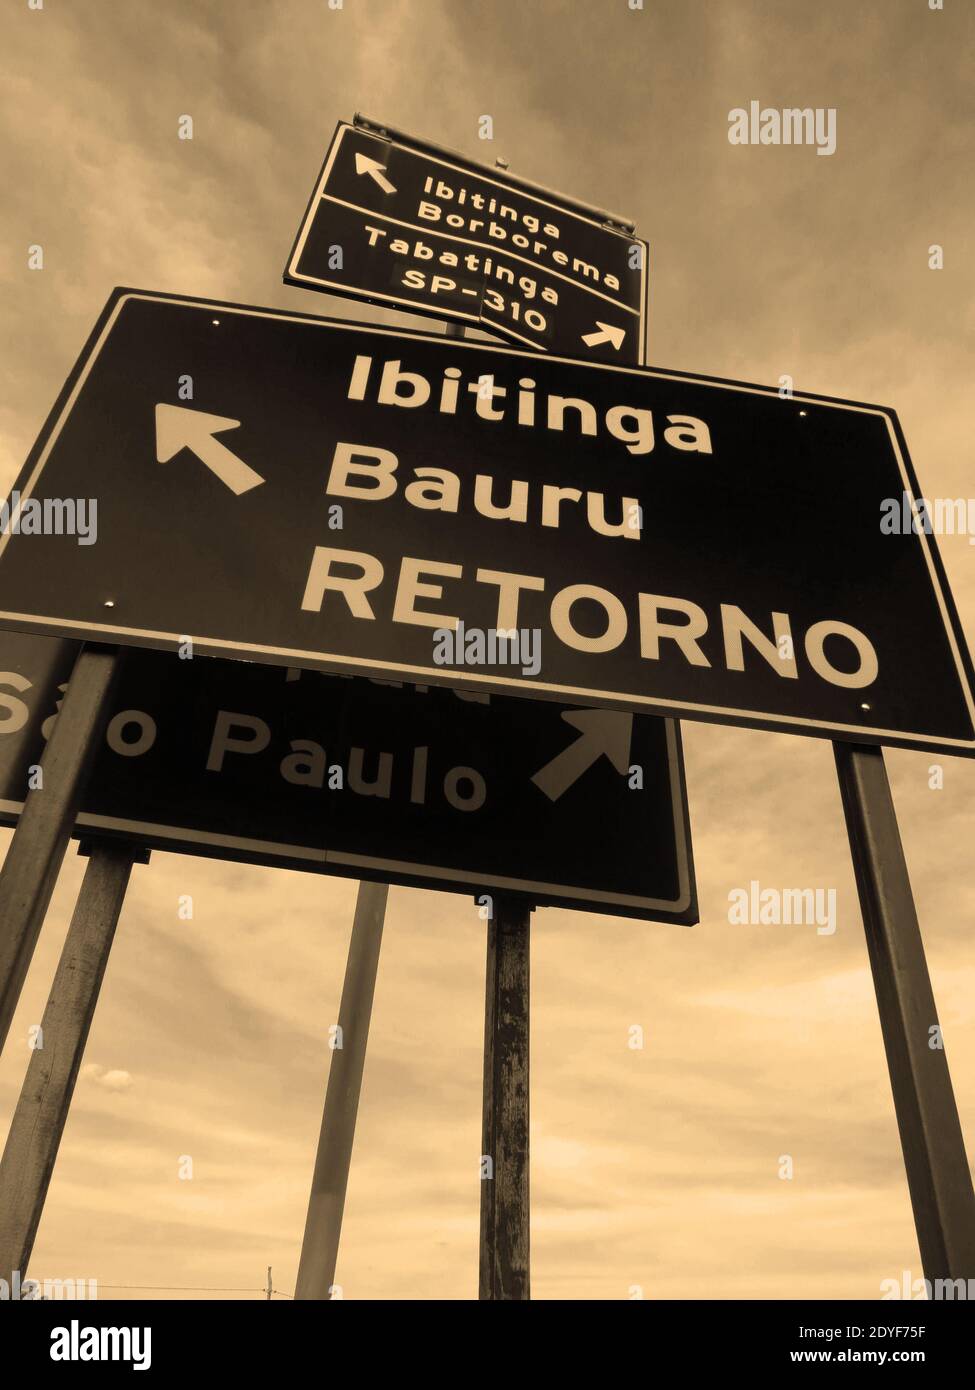 Group of metal signs indicating multiple locations in a confuse way at brazilian countryside [Sepia] Stock Photo